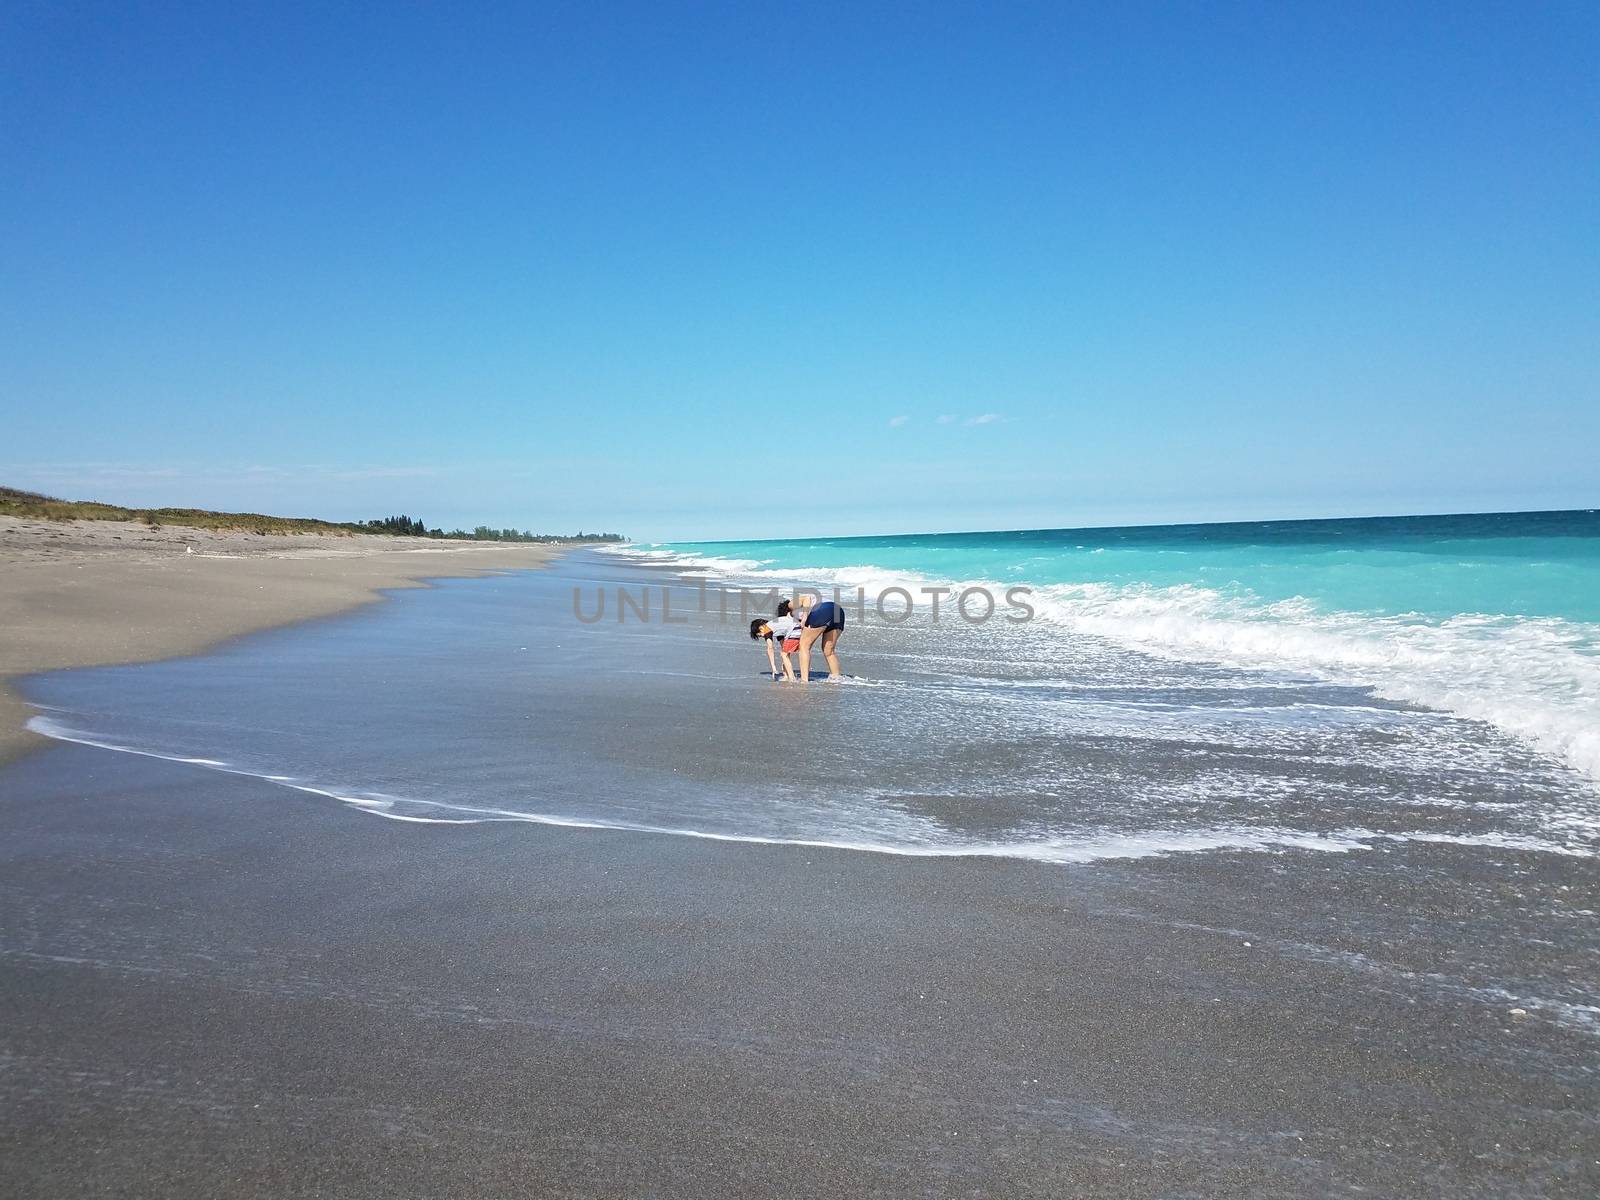 mother and child playing on the beach with waves by stockphotofan1